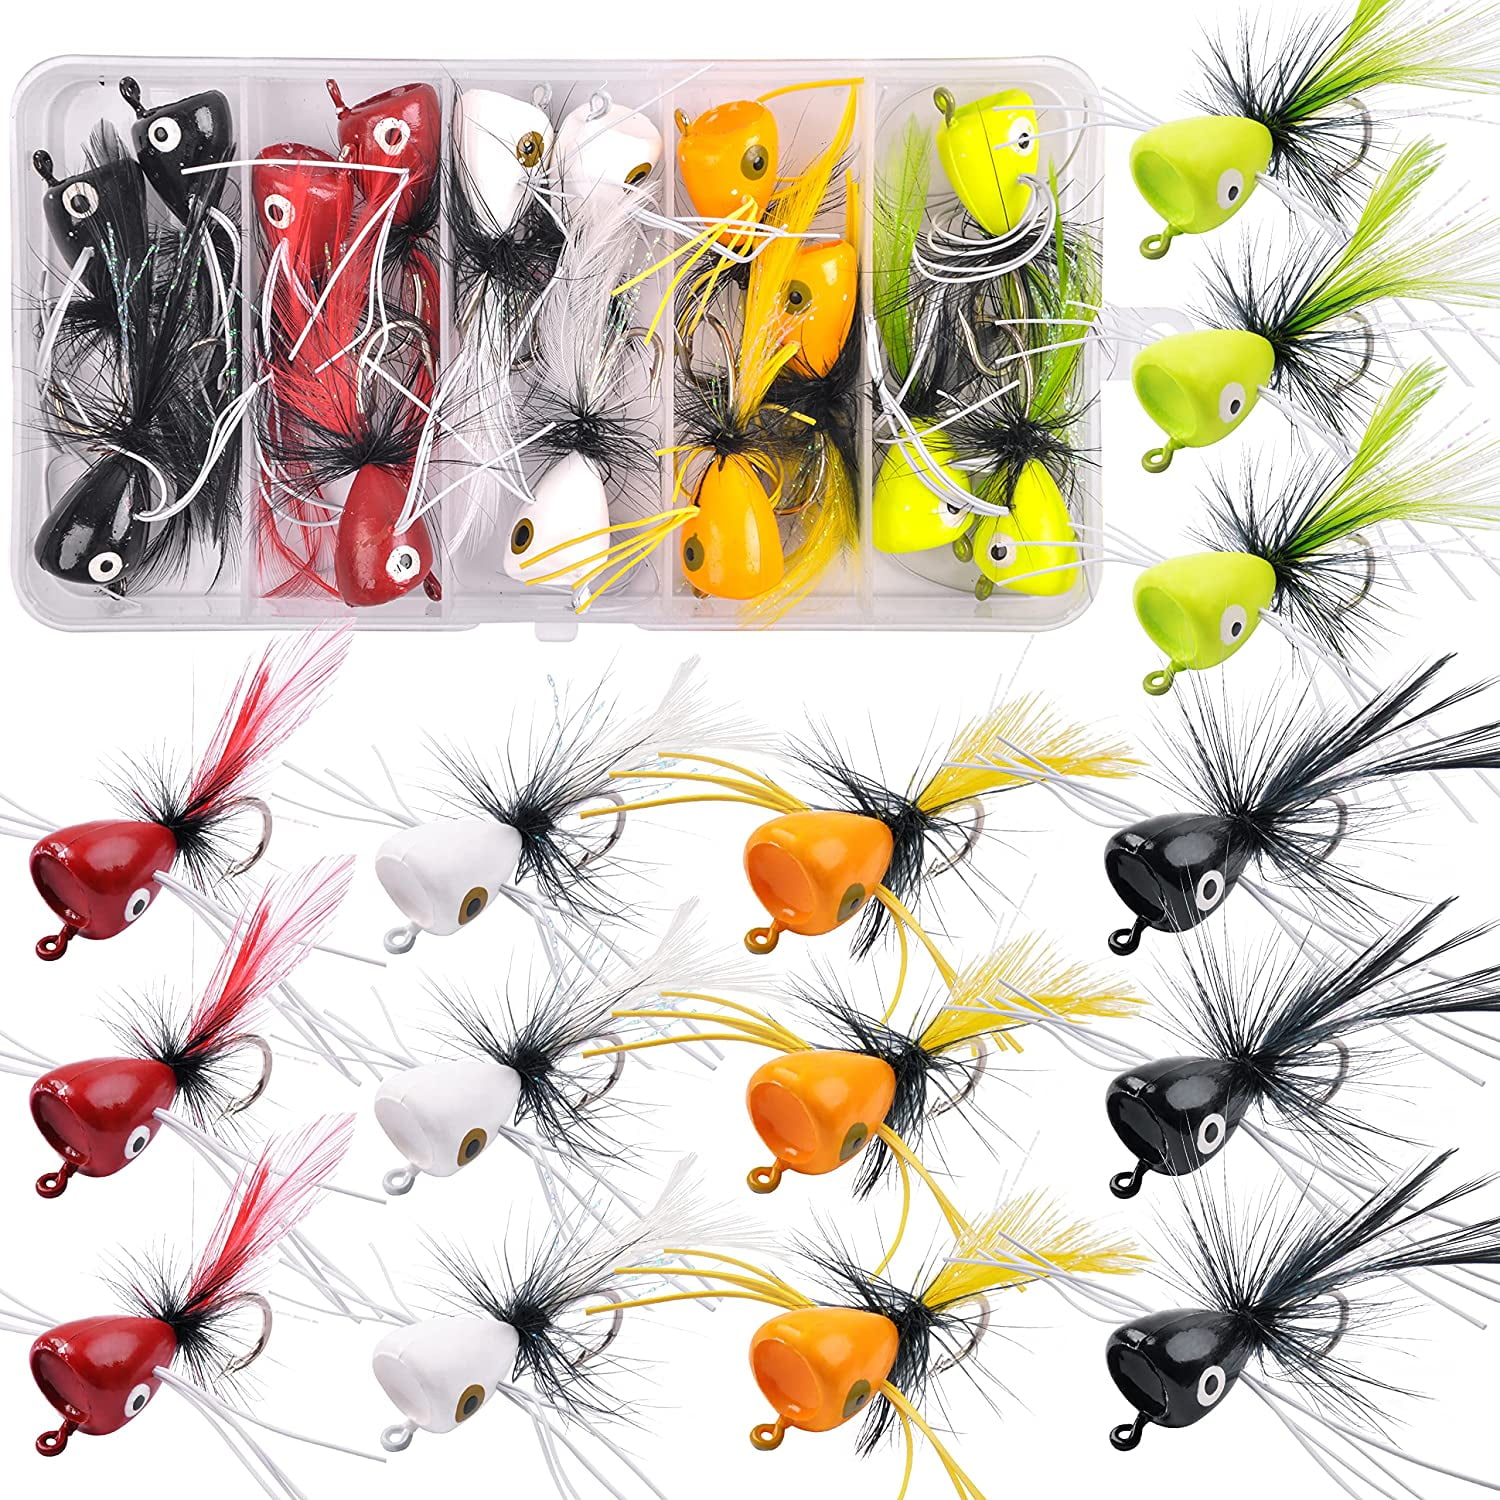 1.5 Tri-Color Crappie Tube Lures 50 Pack Black/Minnow Silver